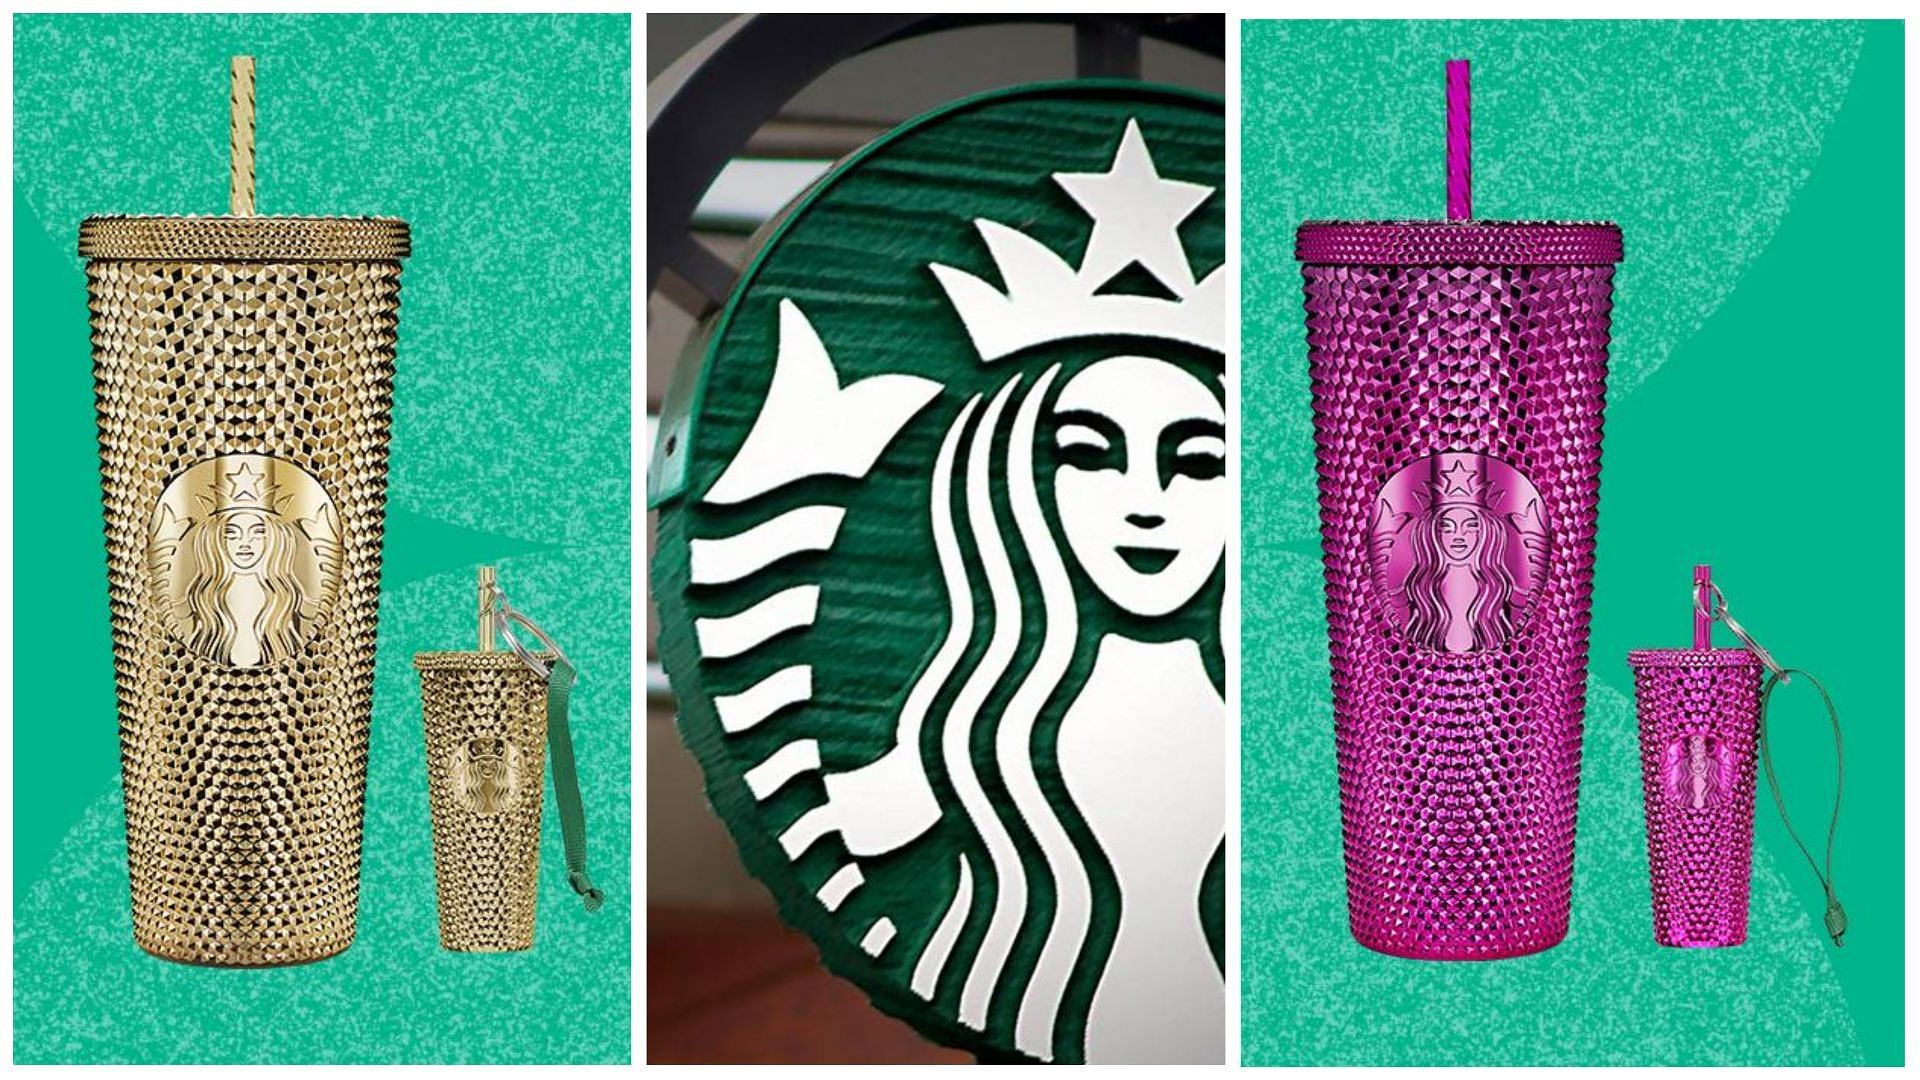 Promotional image of the bling cups, 2022 (Photo via Starbucks)